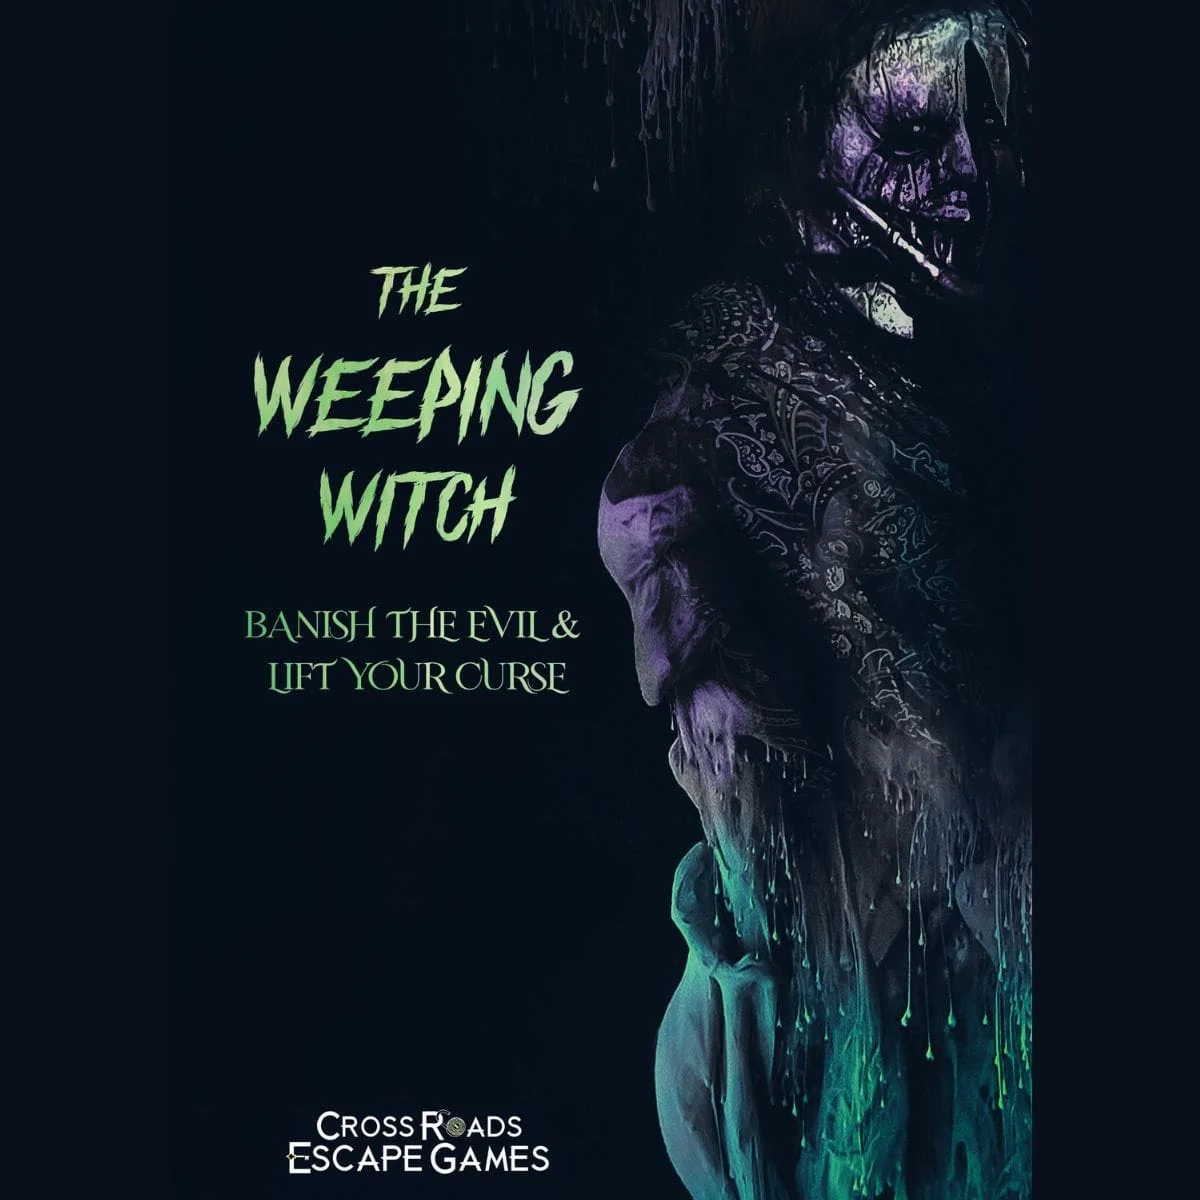 Cross Roads Escape Games: The Weeping Witch